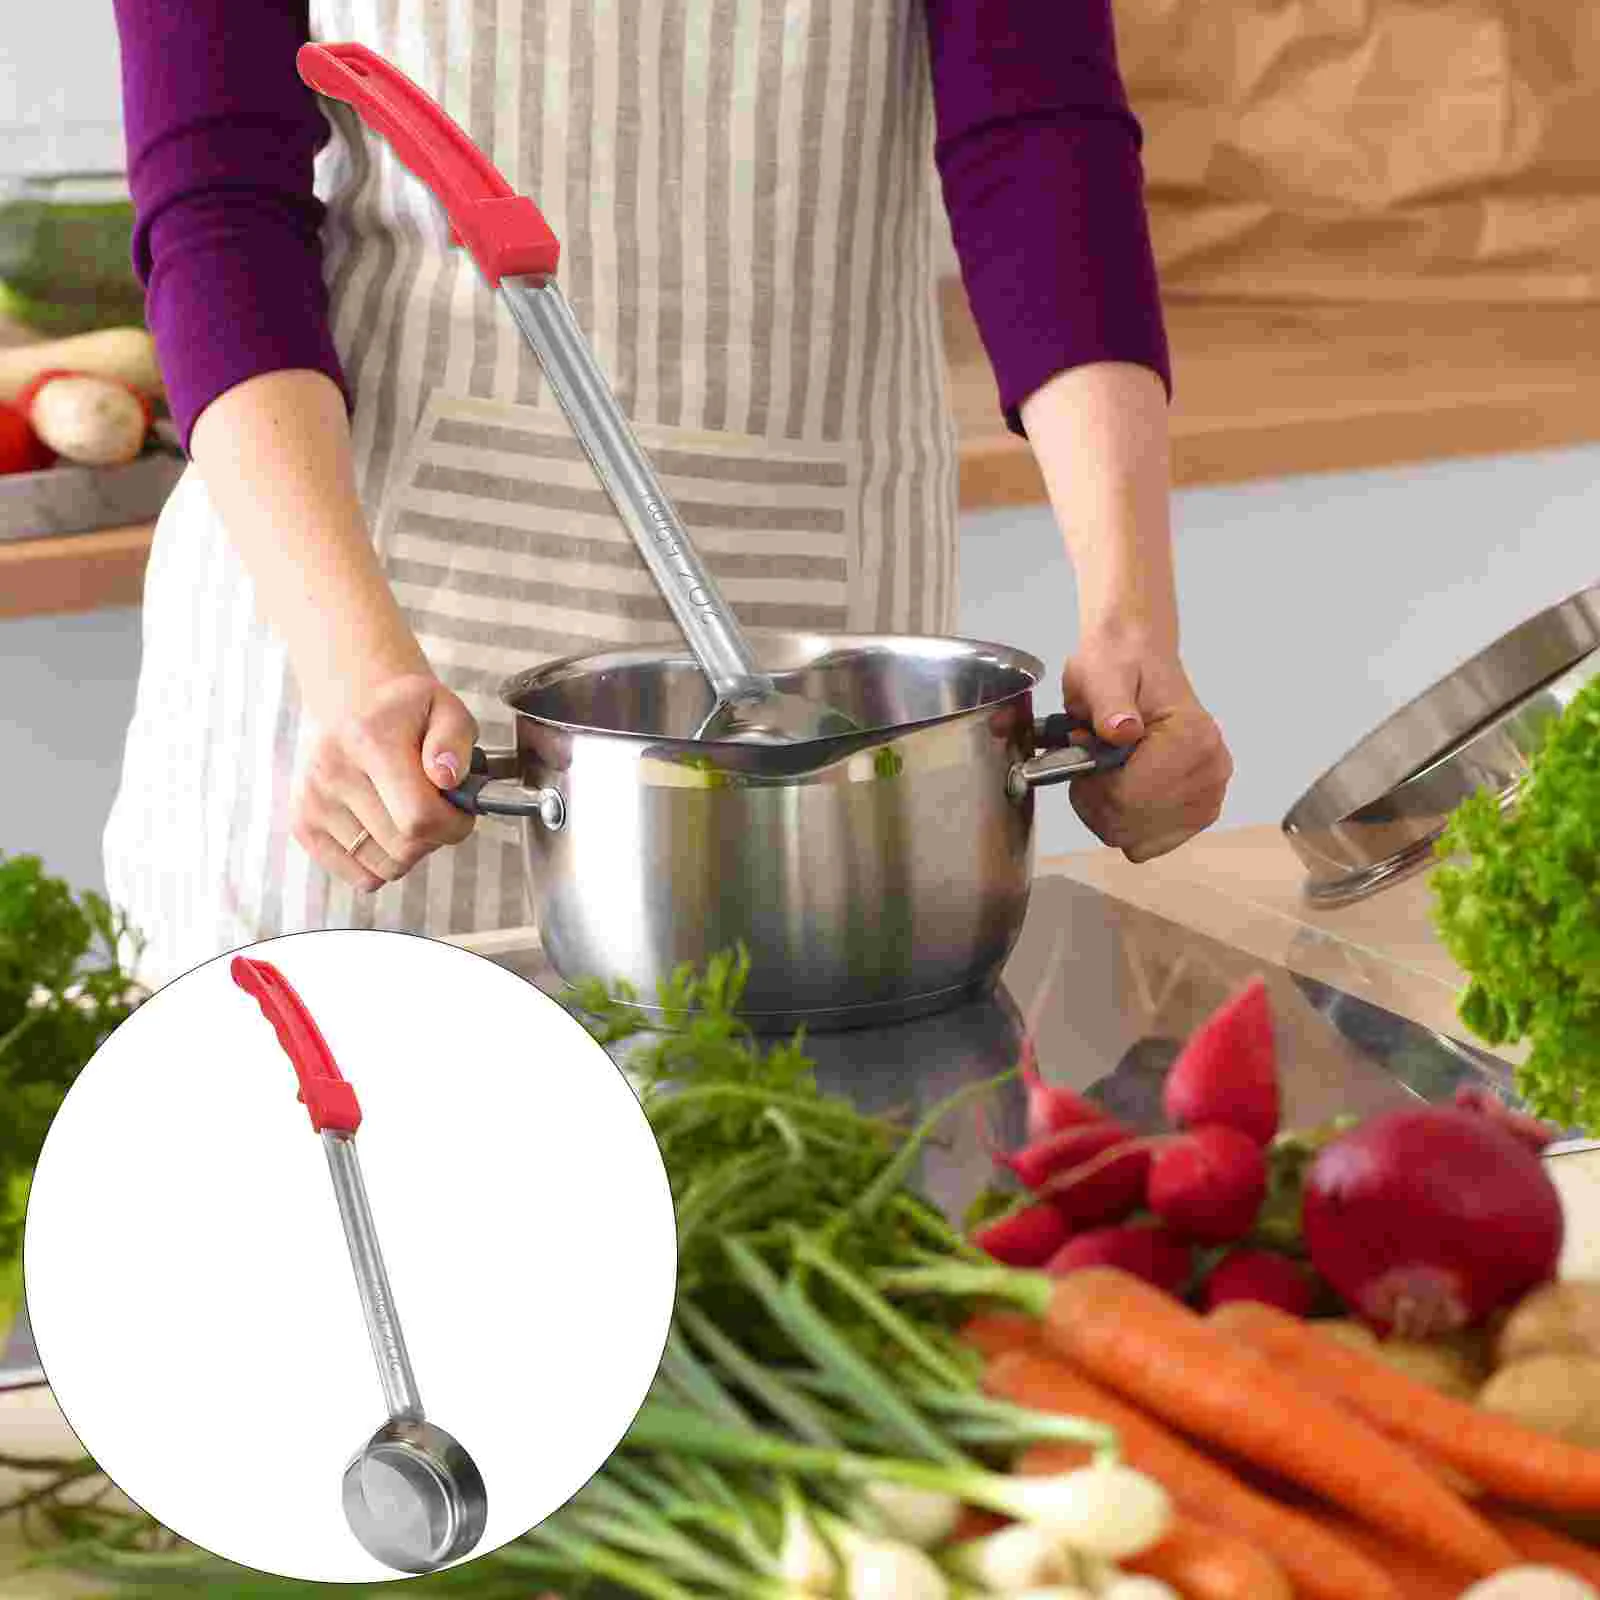 

Portion Spoon Ladle Serving Control Spoons Sauce Soupcontroller Scoop Gravy Portioner Measuring Slotted Steel Stainless Utensil